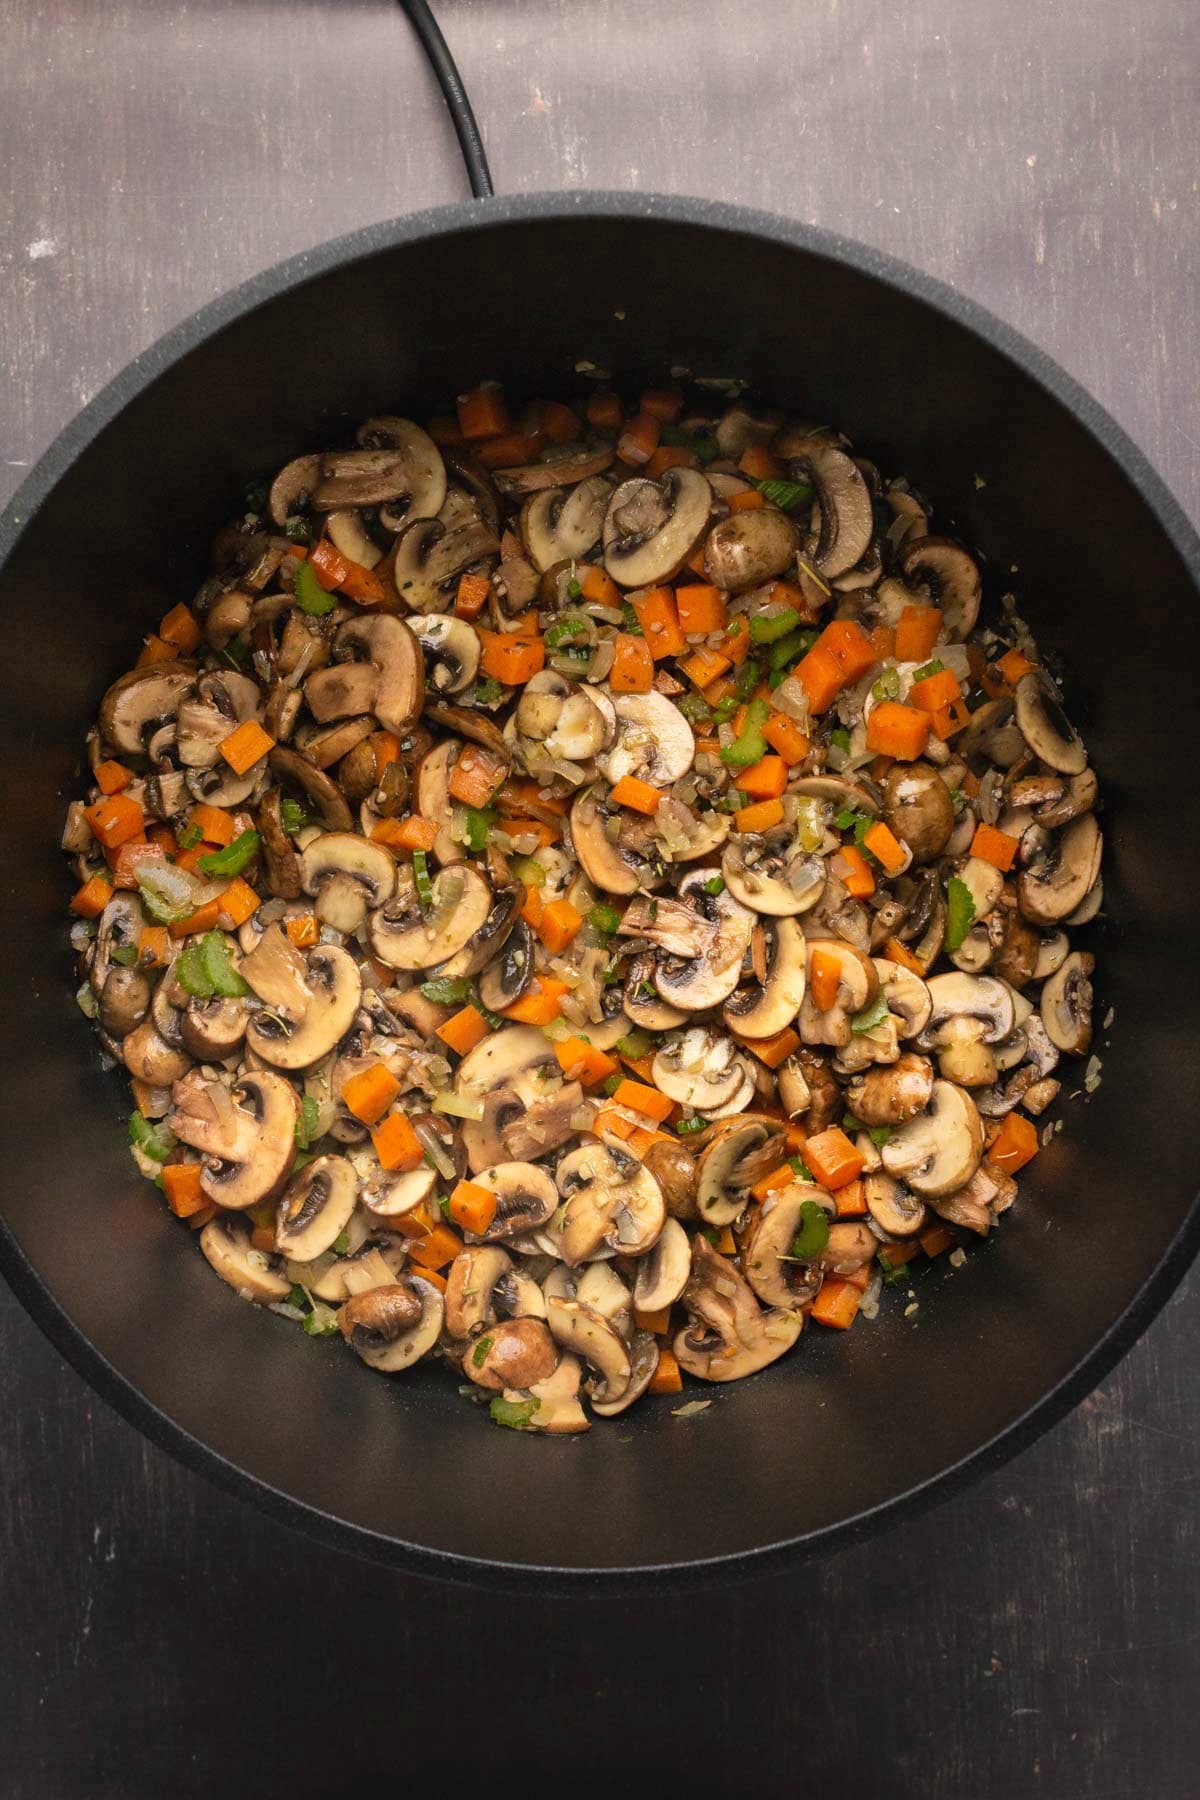 Photo of mushrooms and veggies in a pot.